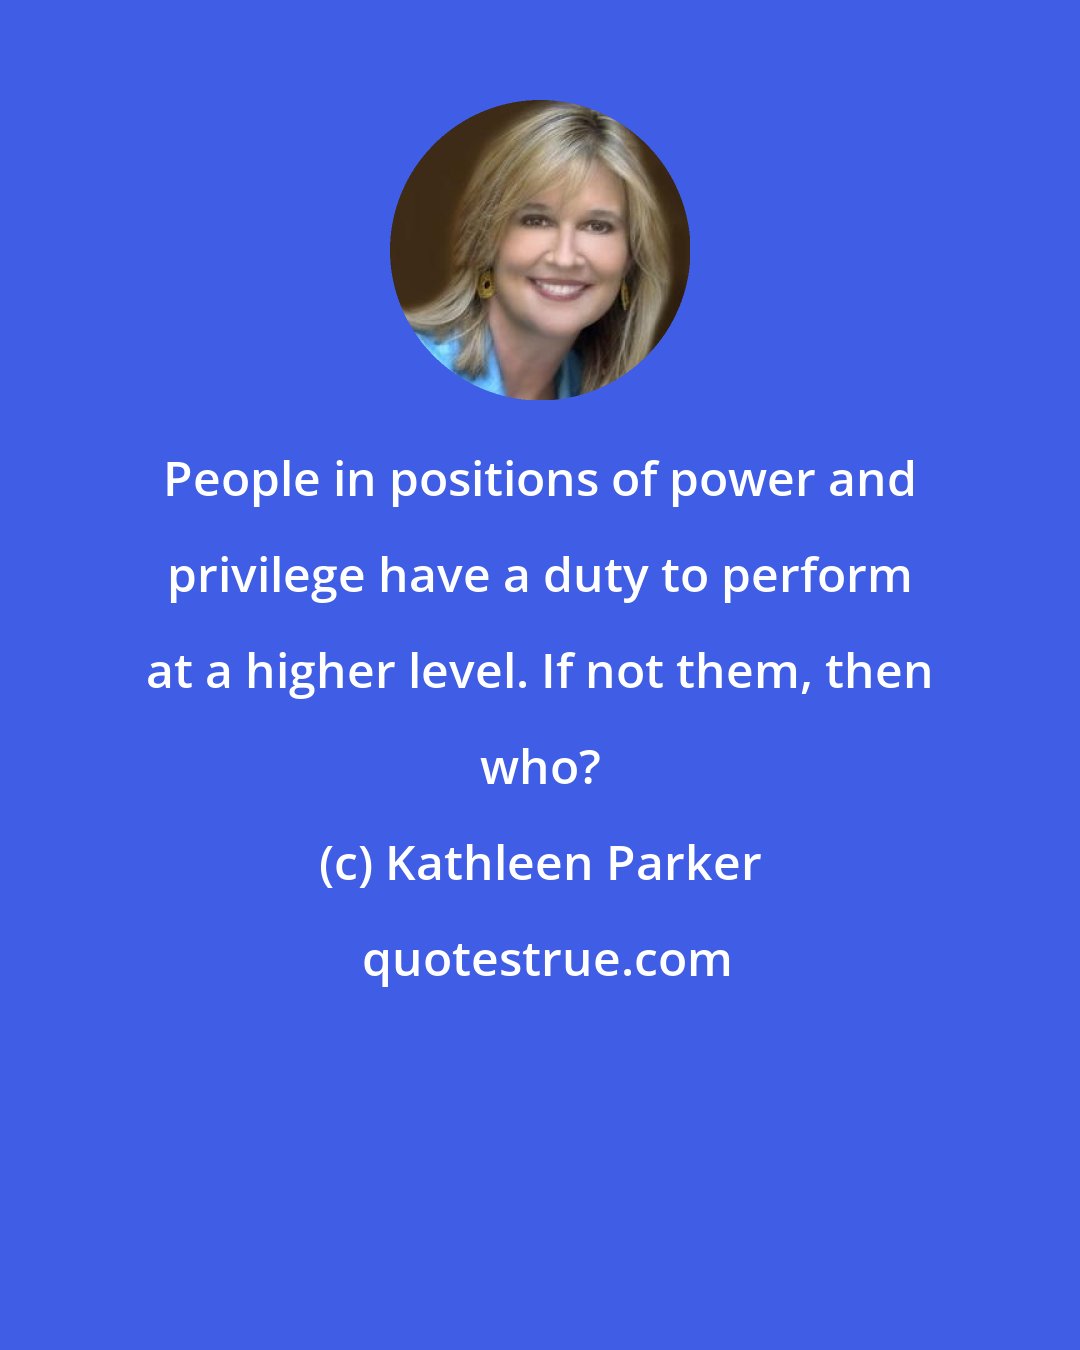 Kathleen Parker: People in positions of power and privilege have a duty to perform at a higher level. If not them, then who?